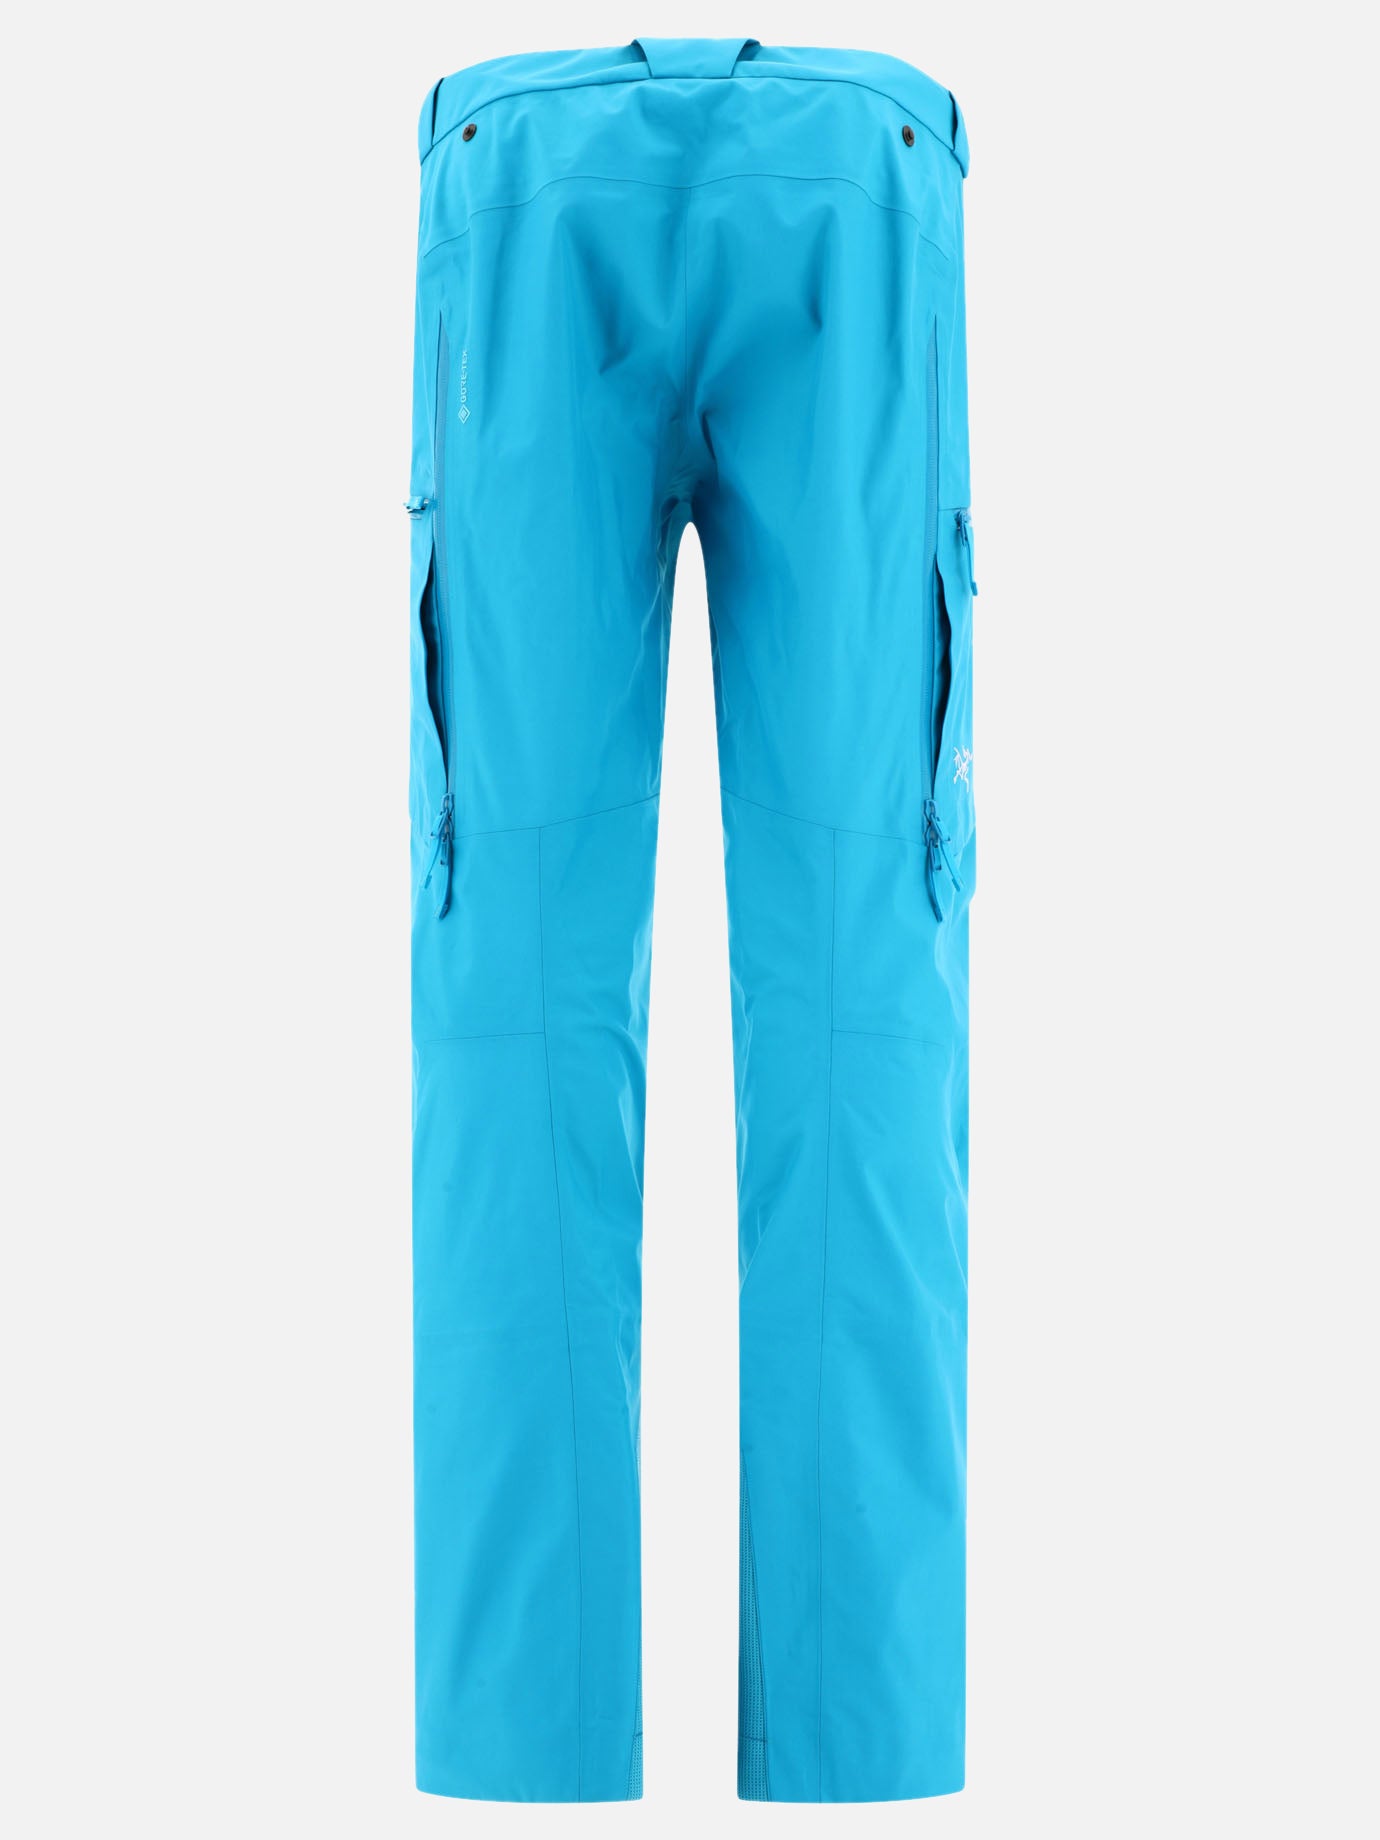 "Sabre" trousers